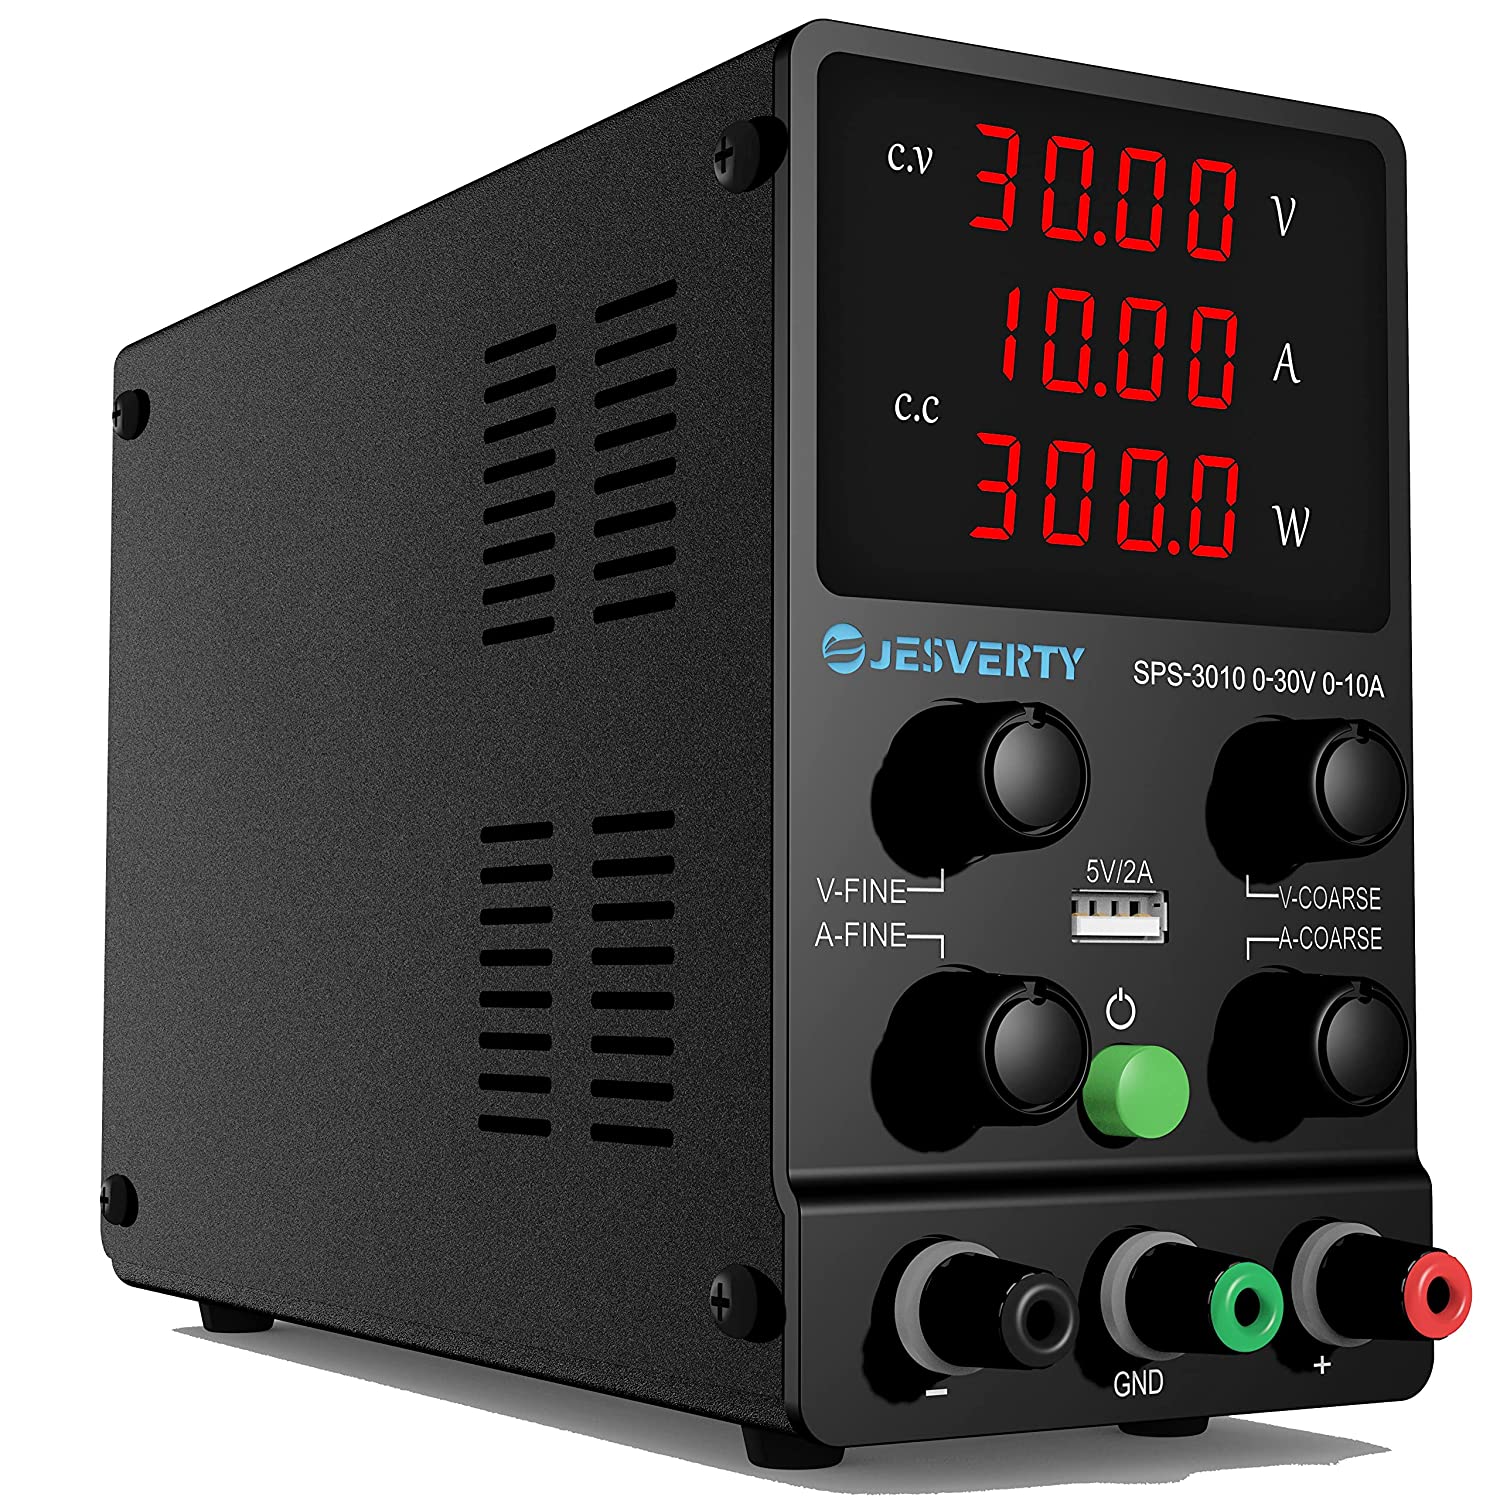 DC stabilized power supply SPS-3010 （30V/10A ）